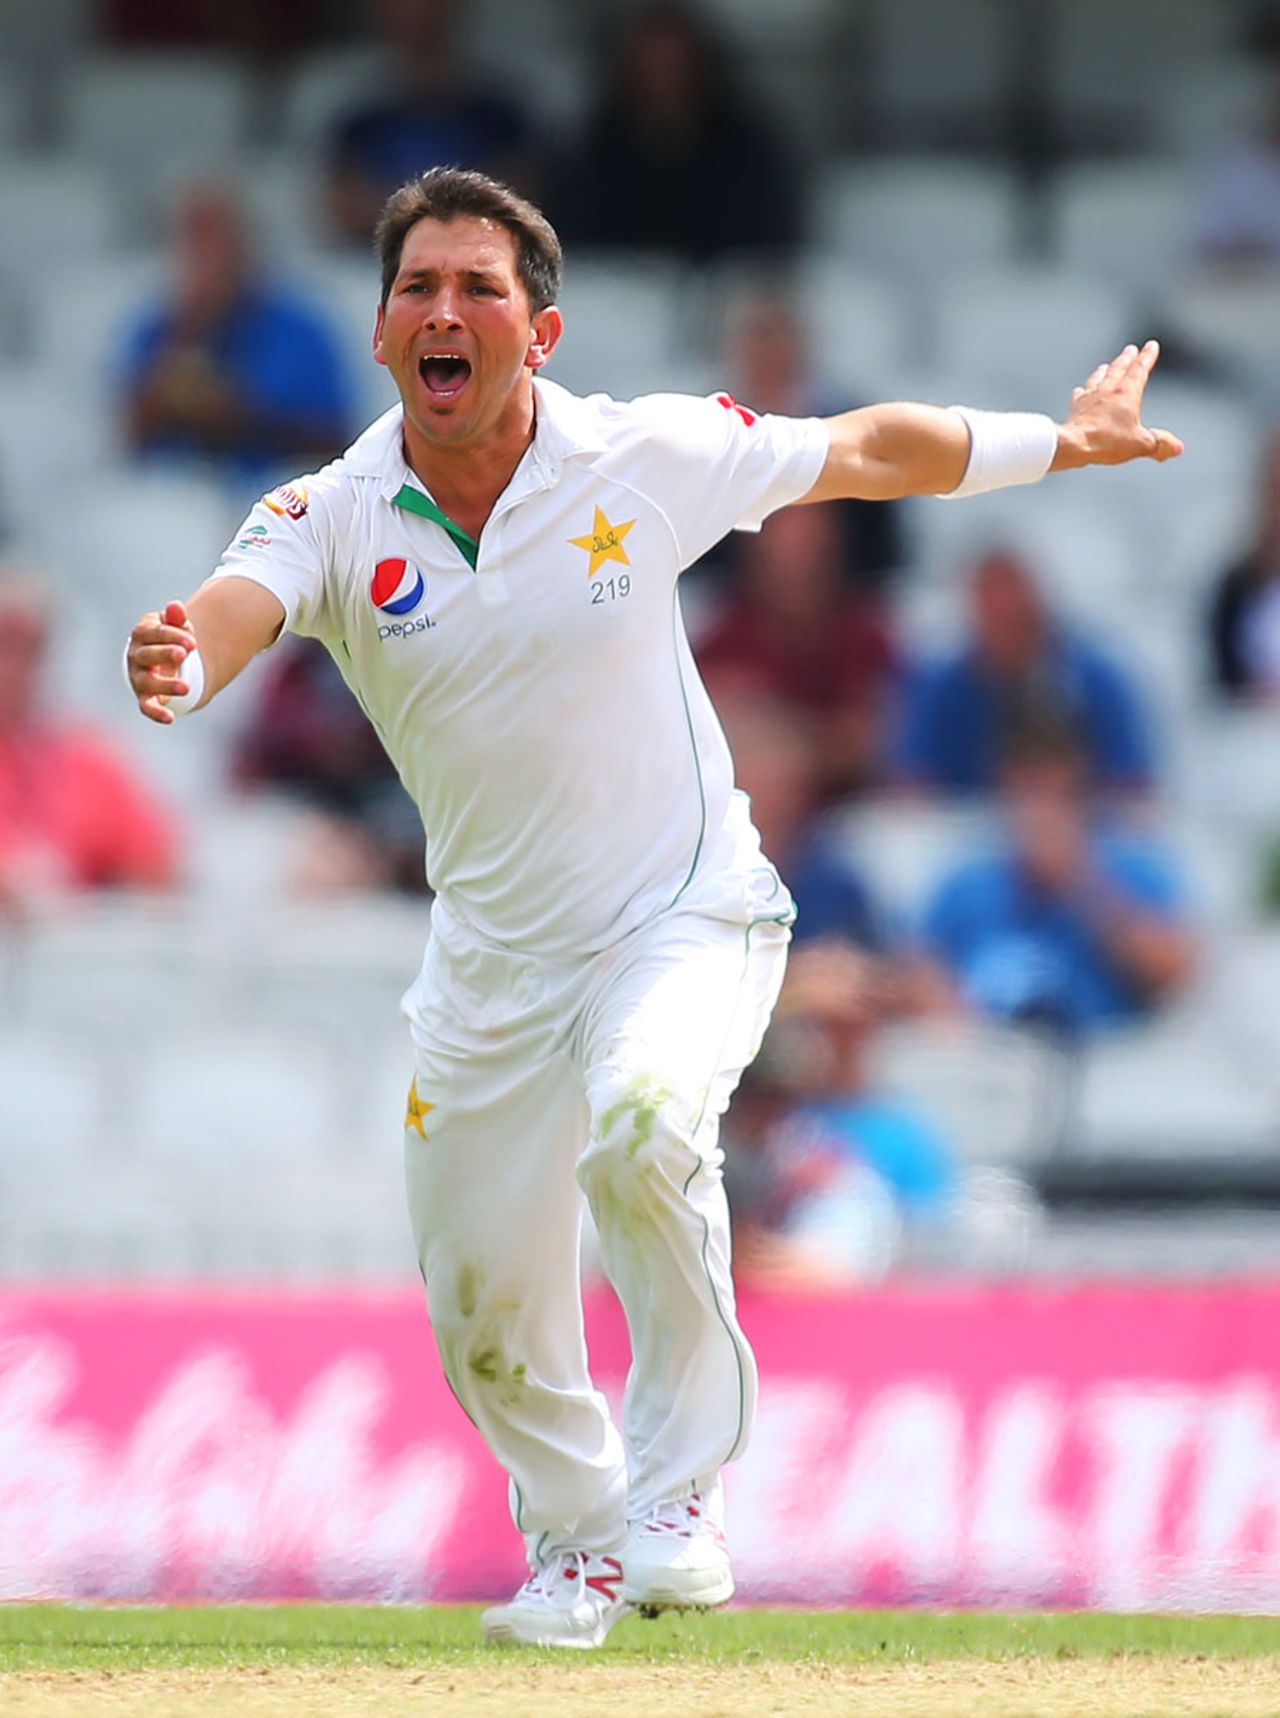 Yasir Shah struck just before lunch, England v Pakistan, 4th Test, The Oval, 4th day, August 14, 2016